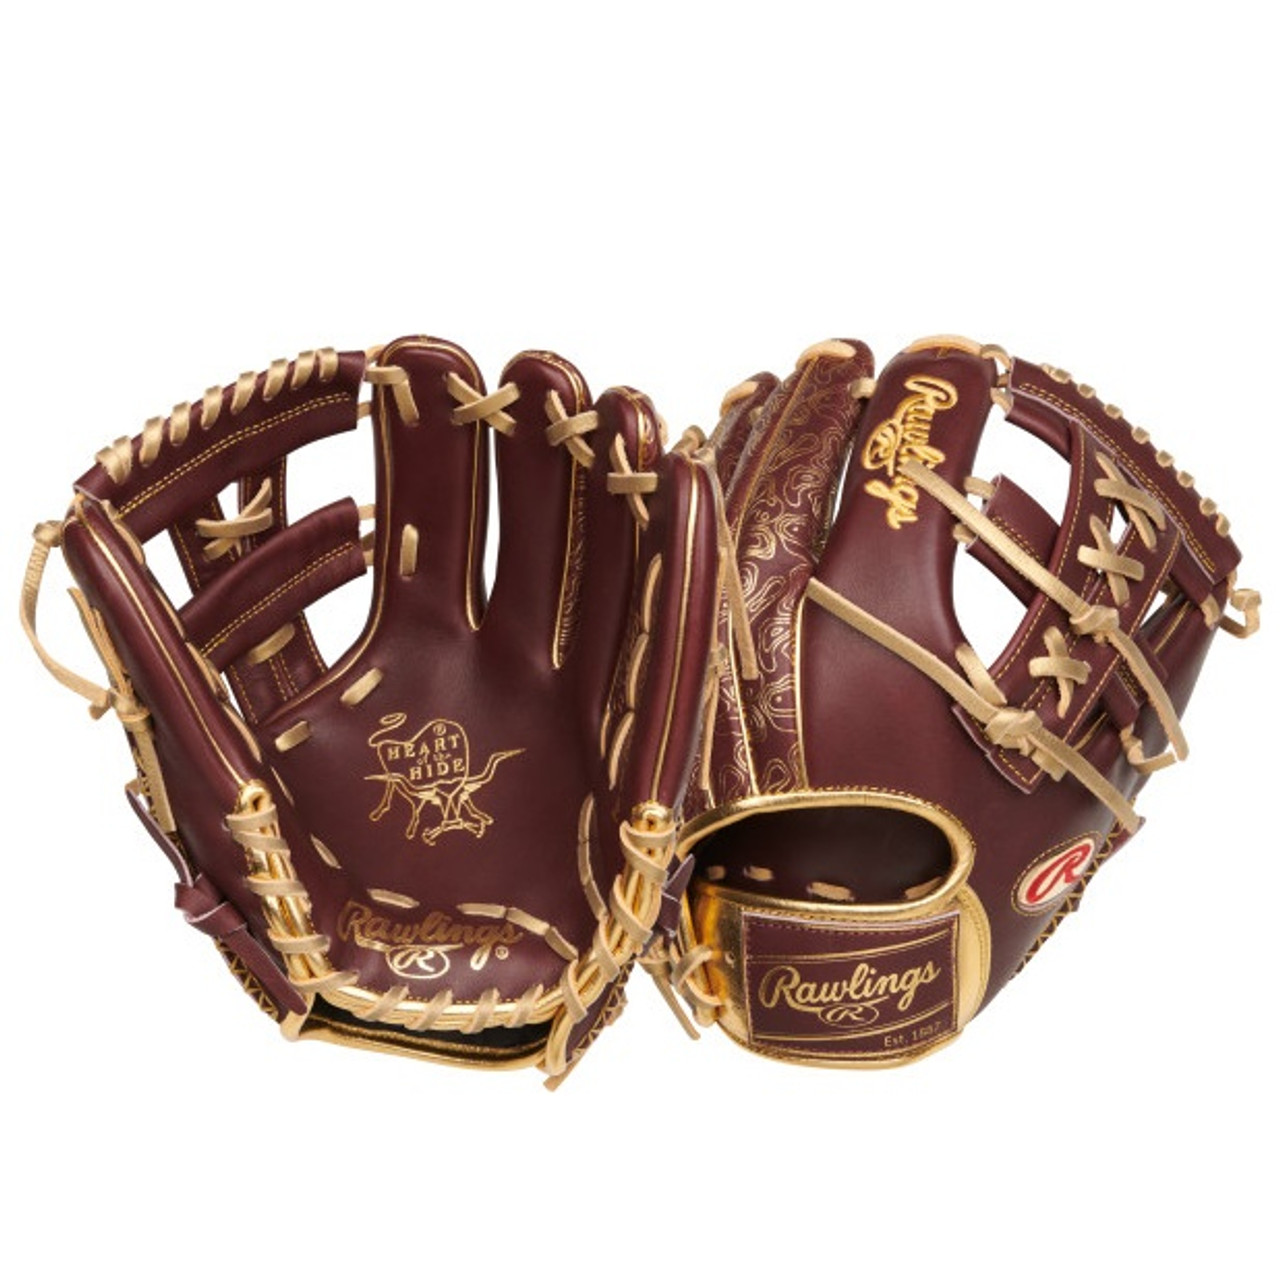 Has Rawlings finally fixed the Gold Gloves? 